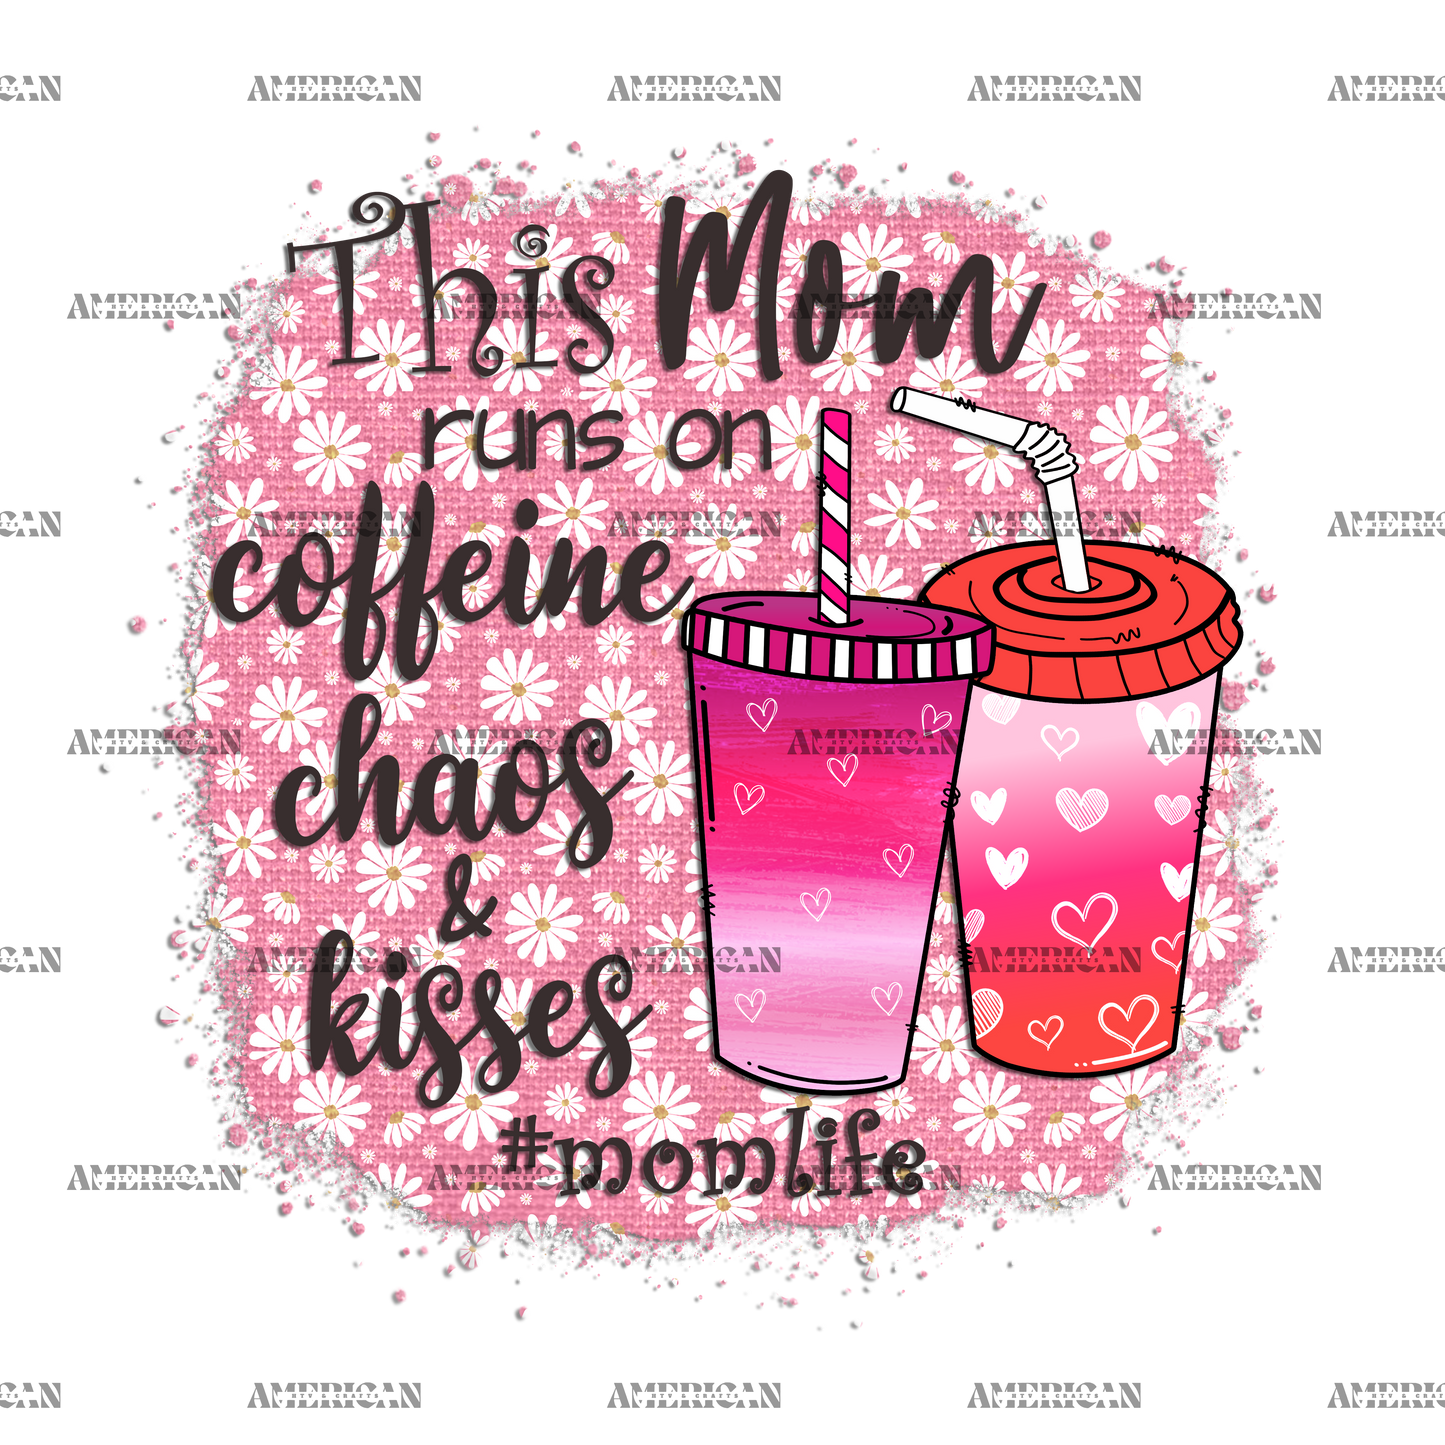 This Mom Run On Caffeine Chaos Kisses DTF Transfer